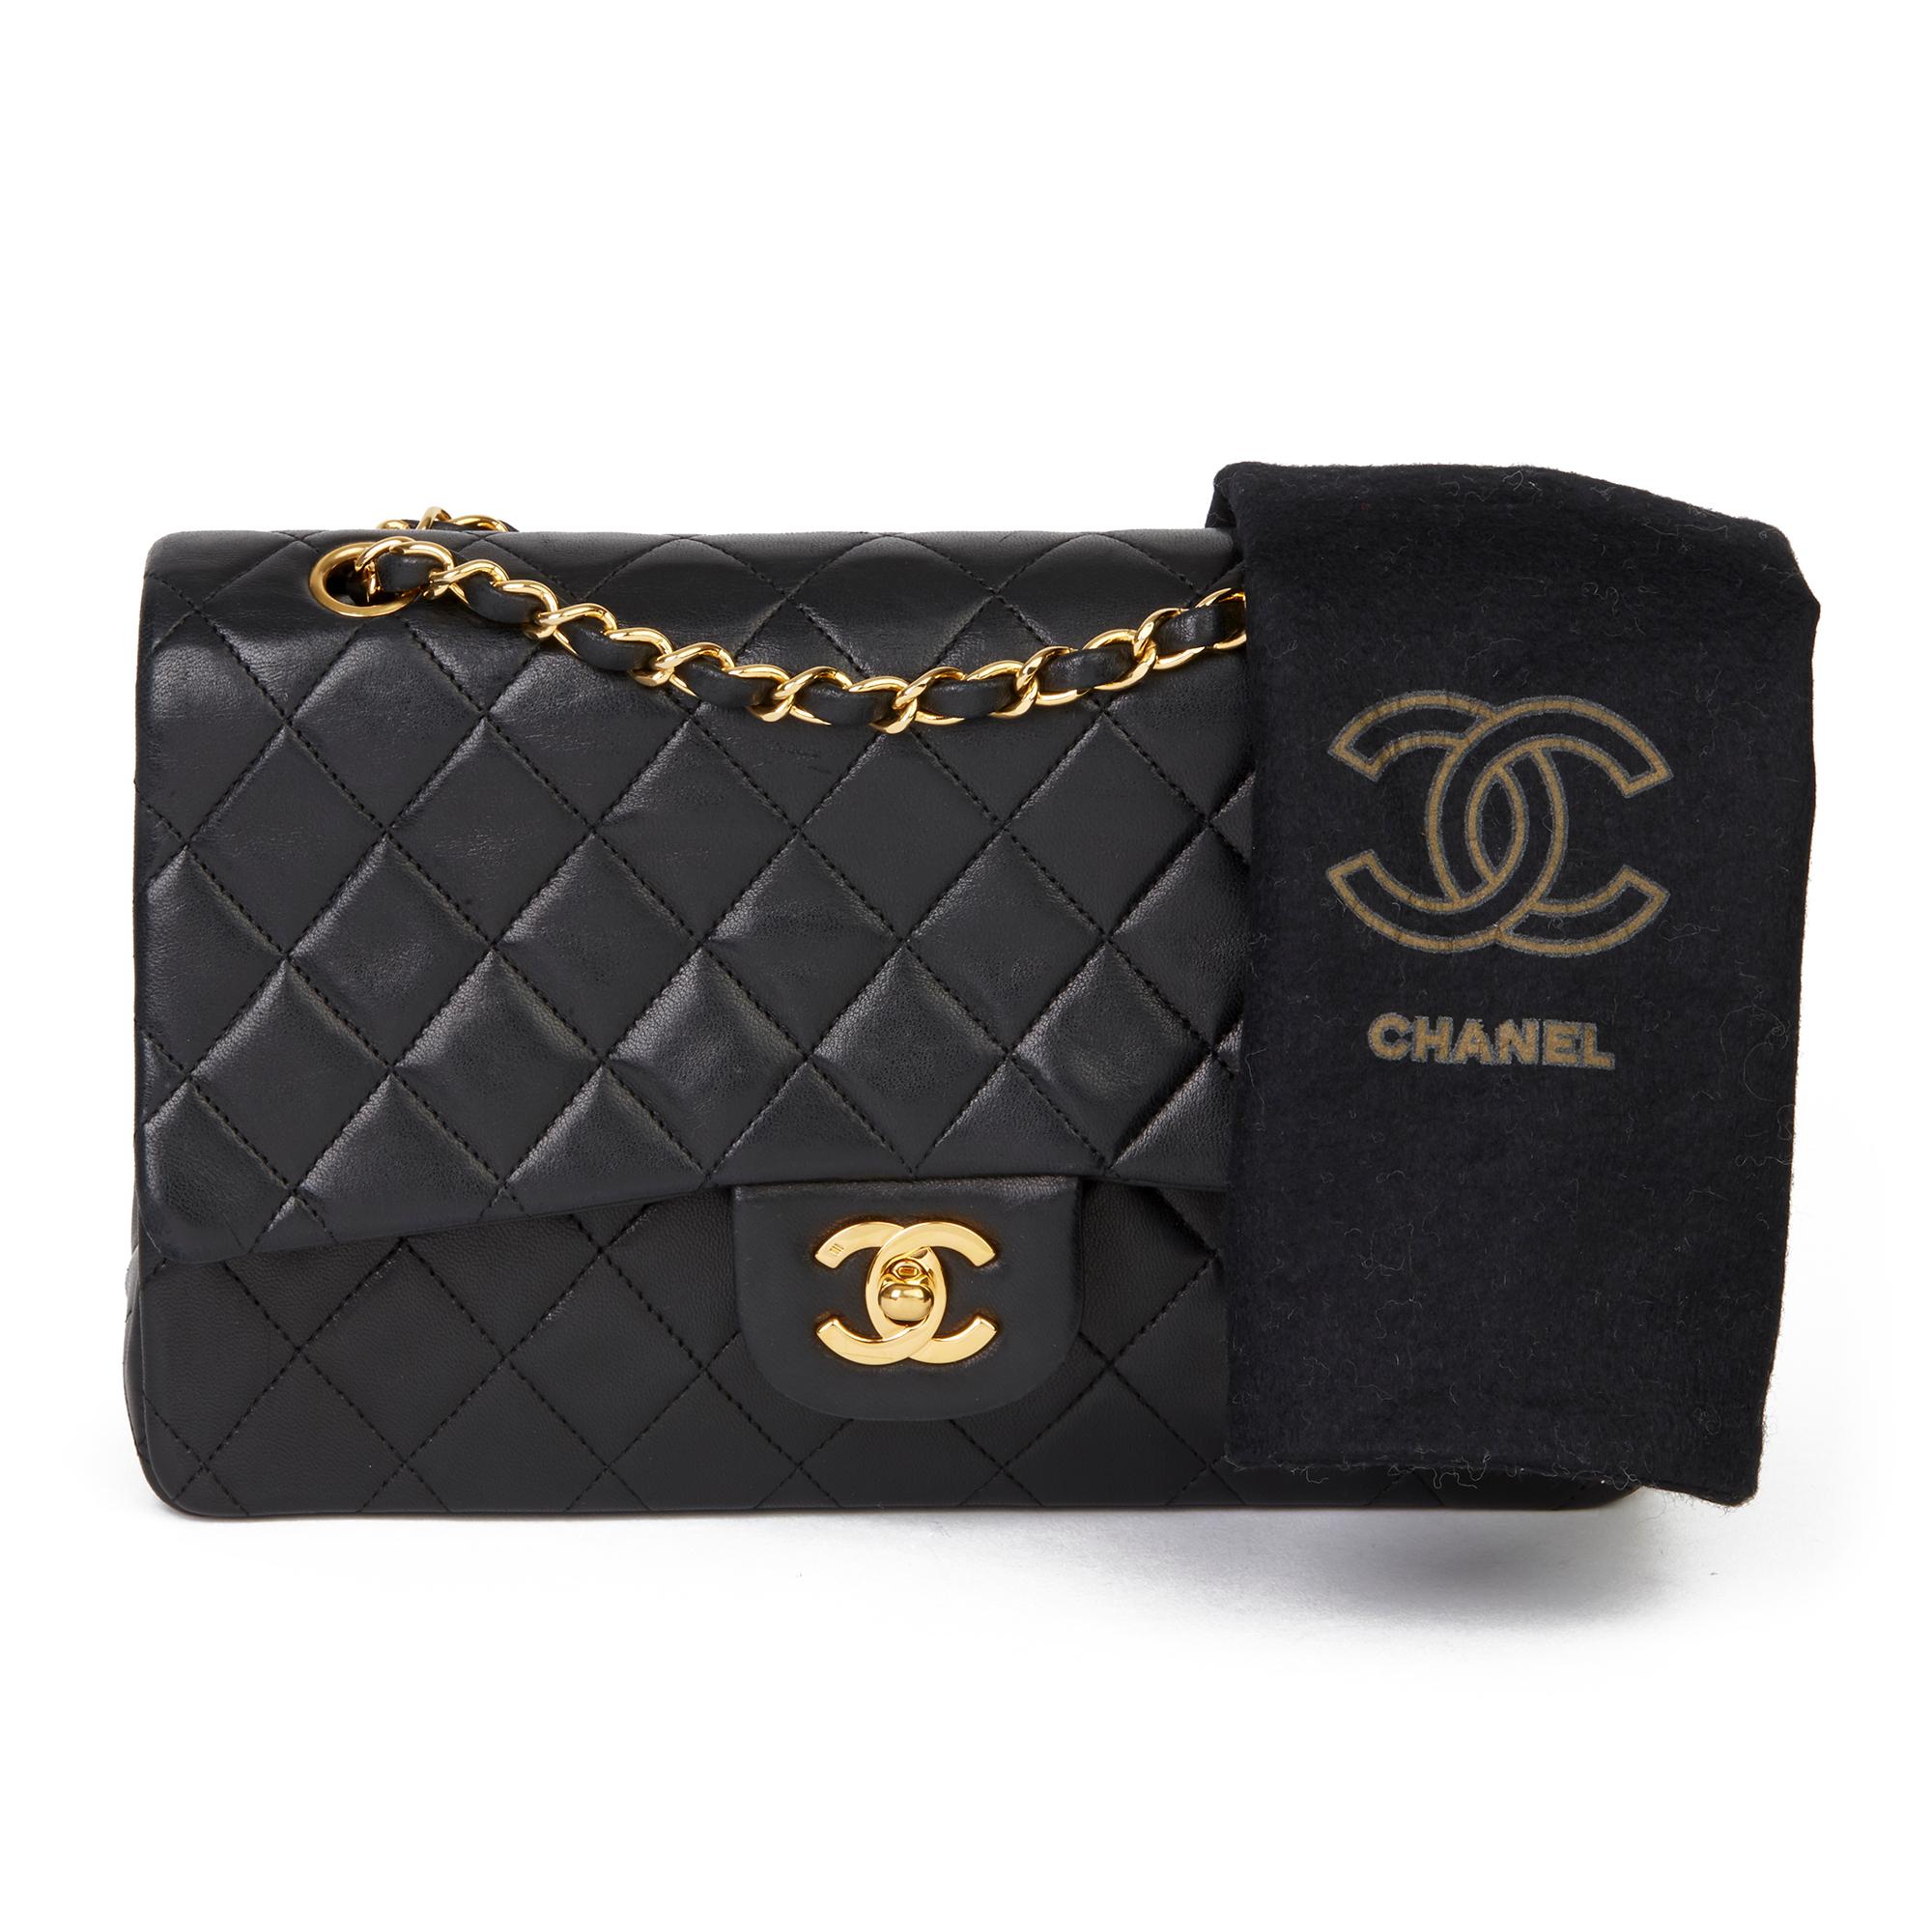 1991 Chanel Black Quilted Lambskin Vintage Medium Classic Double Flap Bag 8